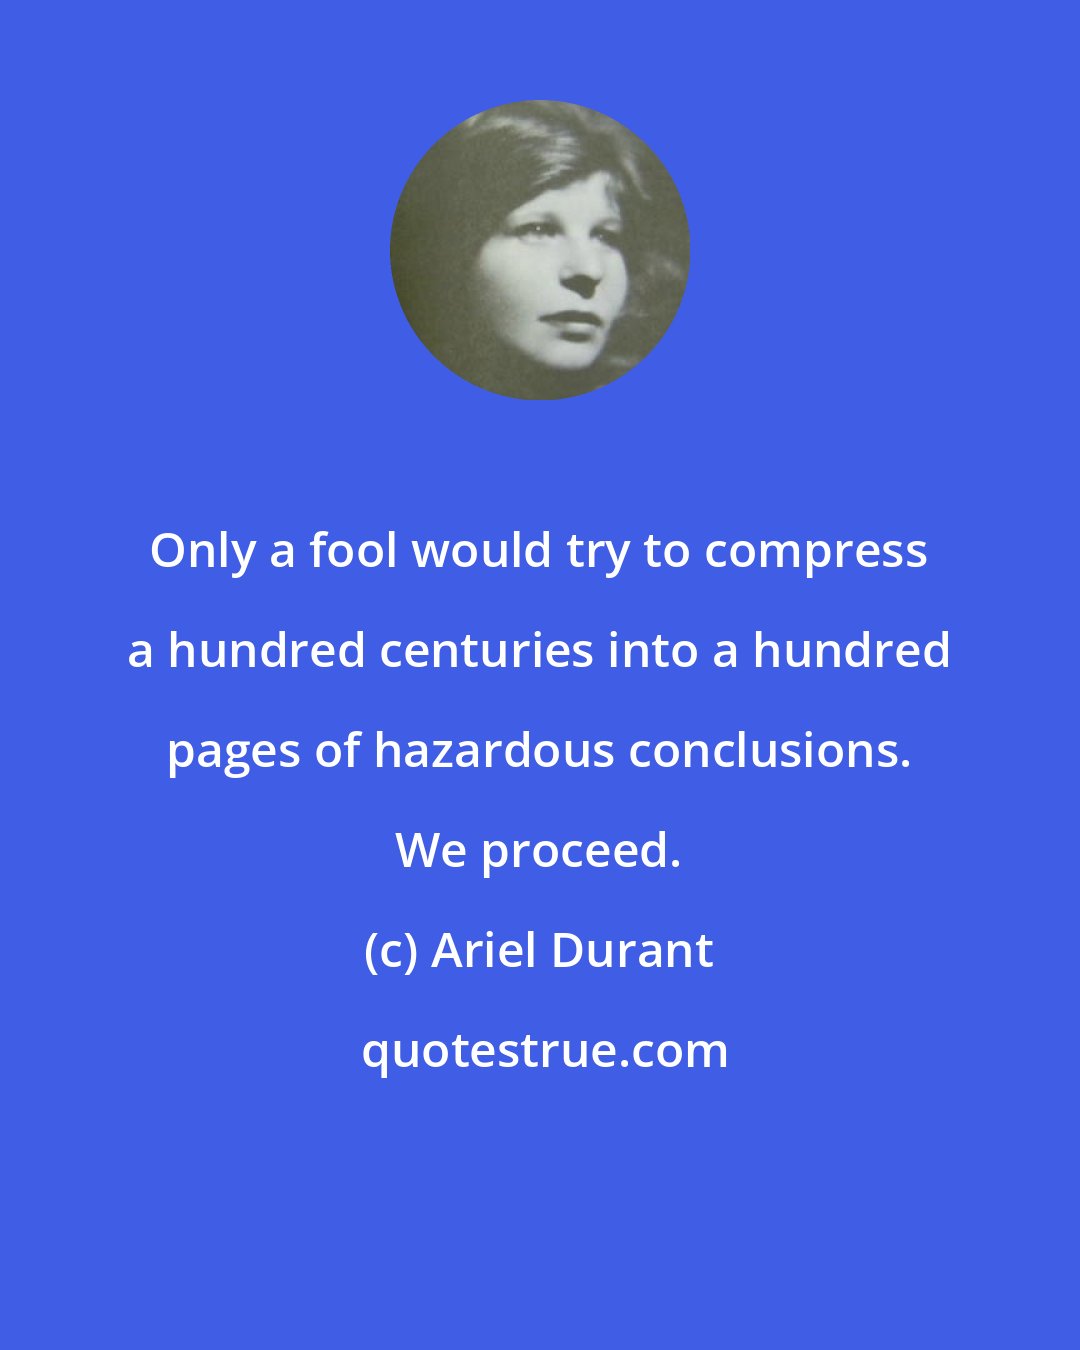 Ariel Durant: Only a fool would try to compress a hundred centuries into a hundred pages of hazardous conclusions. We proceed.